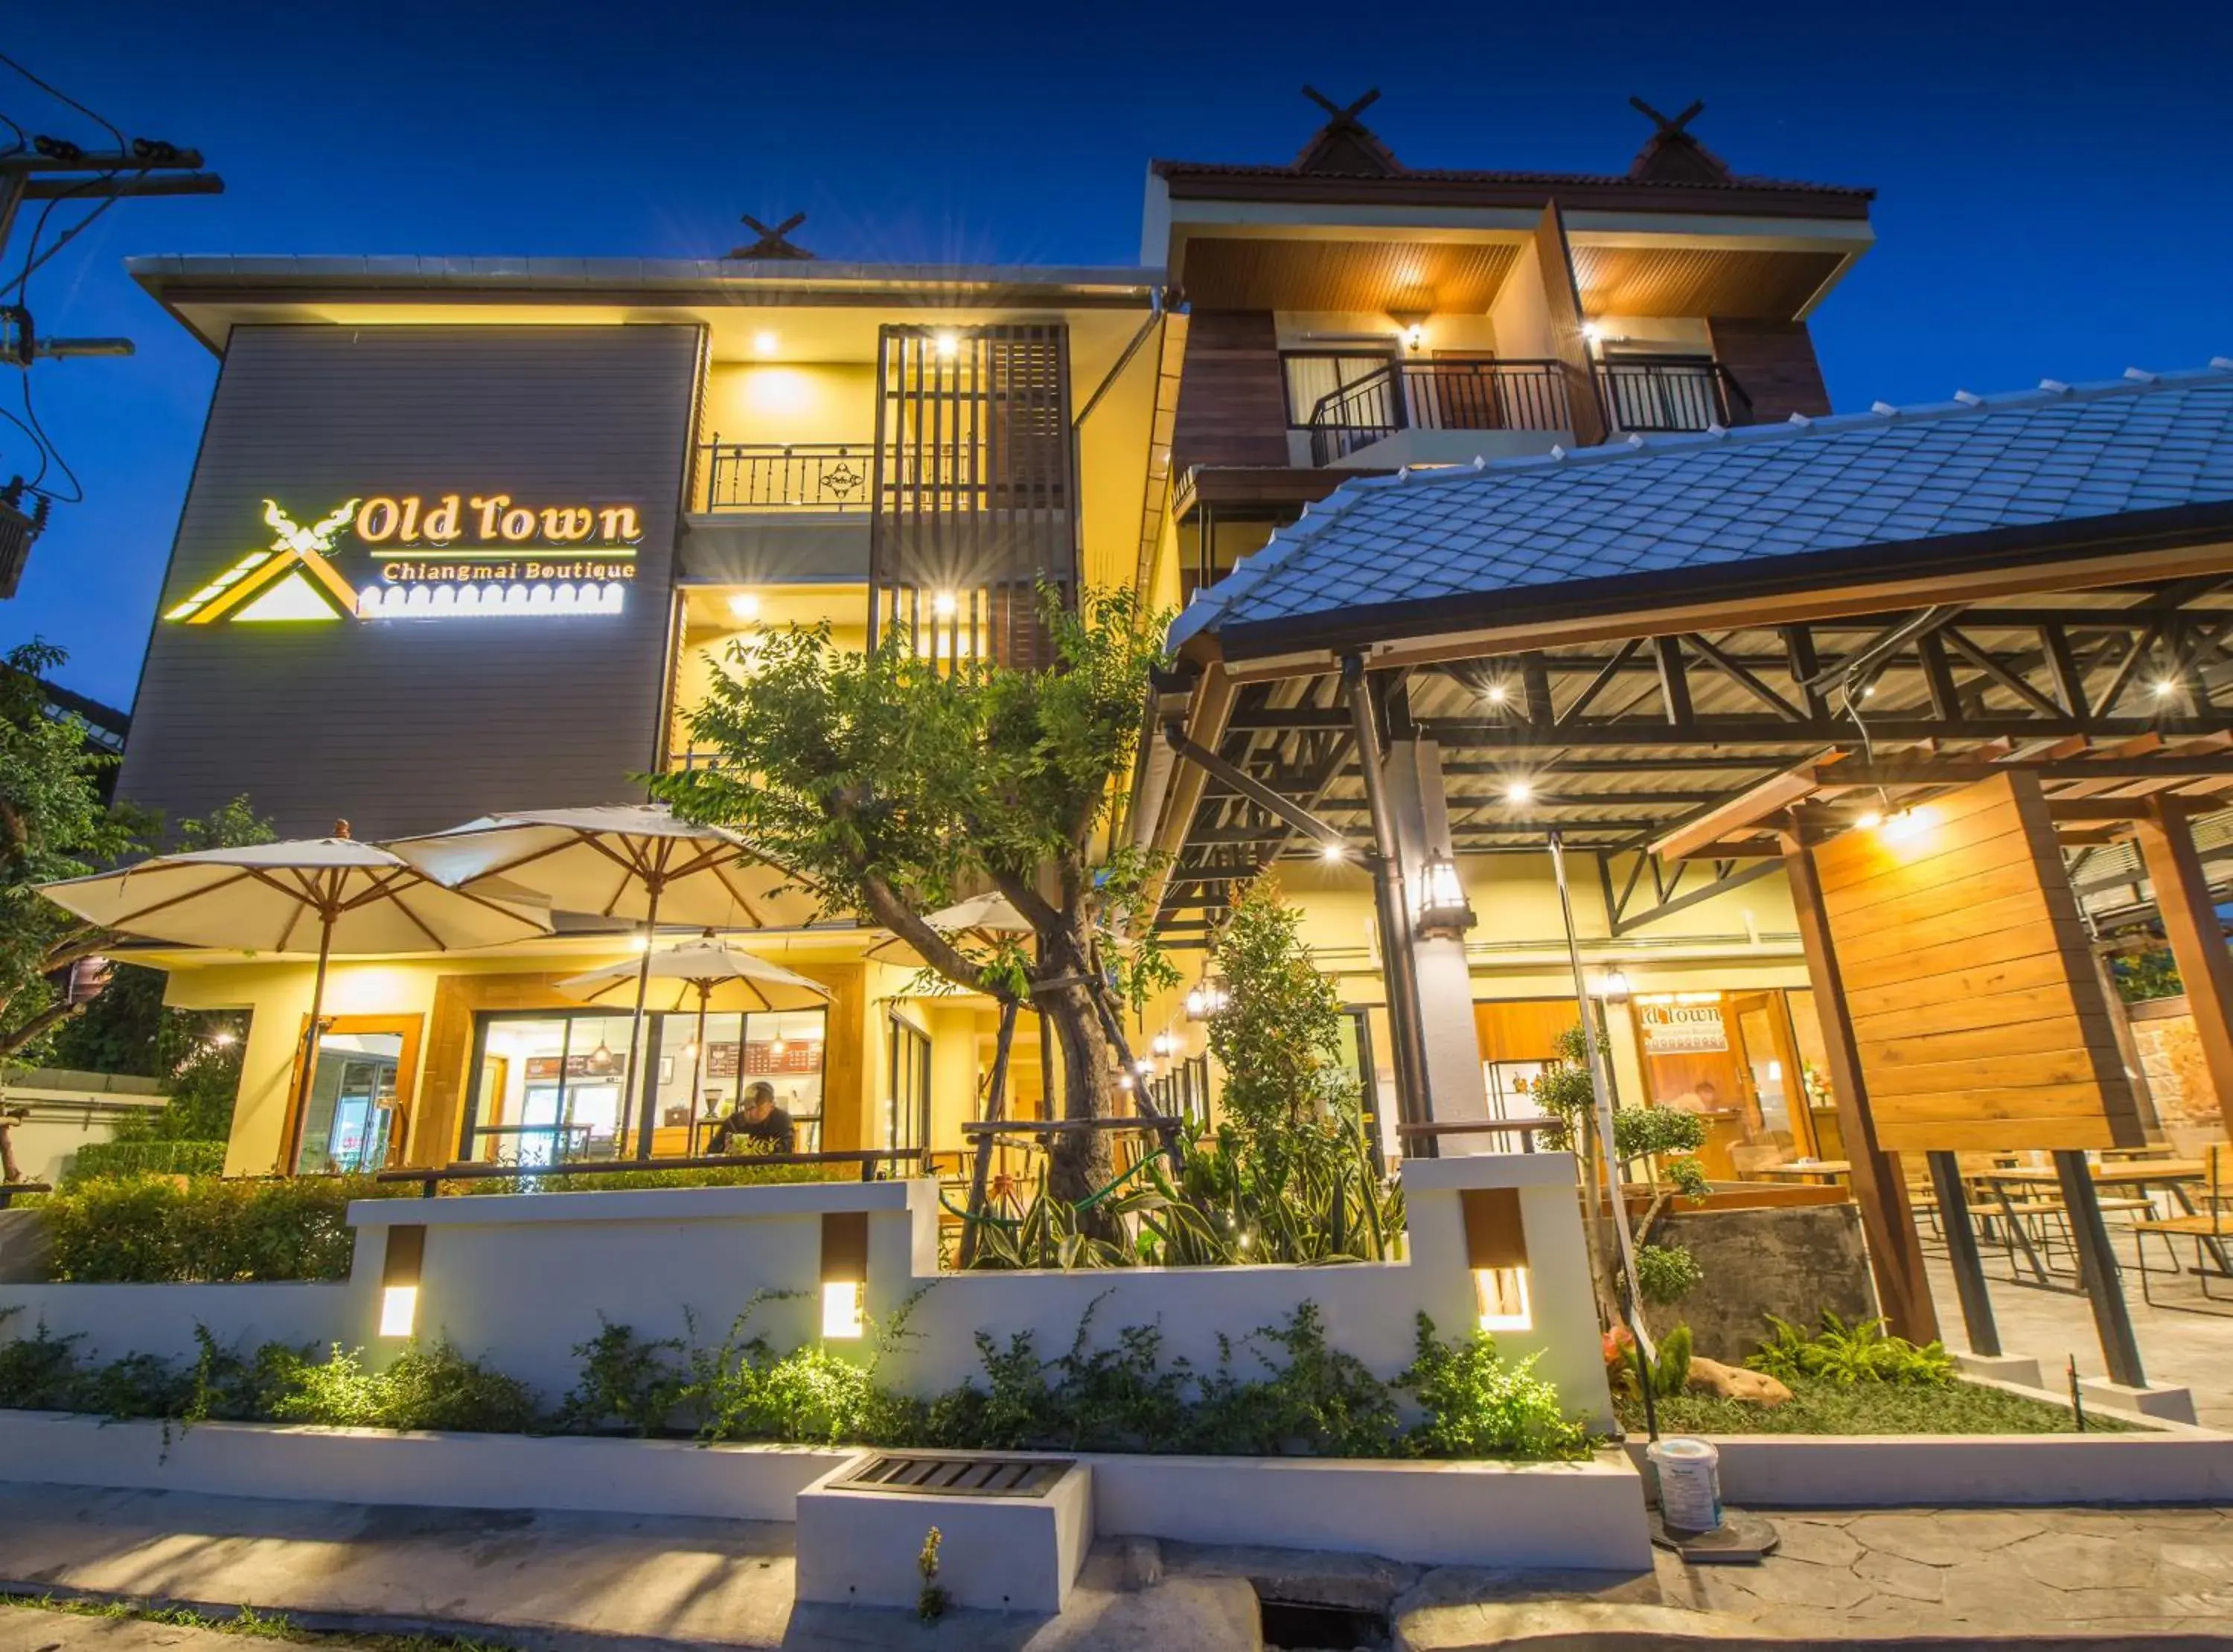 Property Building in Old Town Chiangmai Boutique